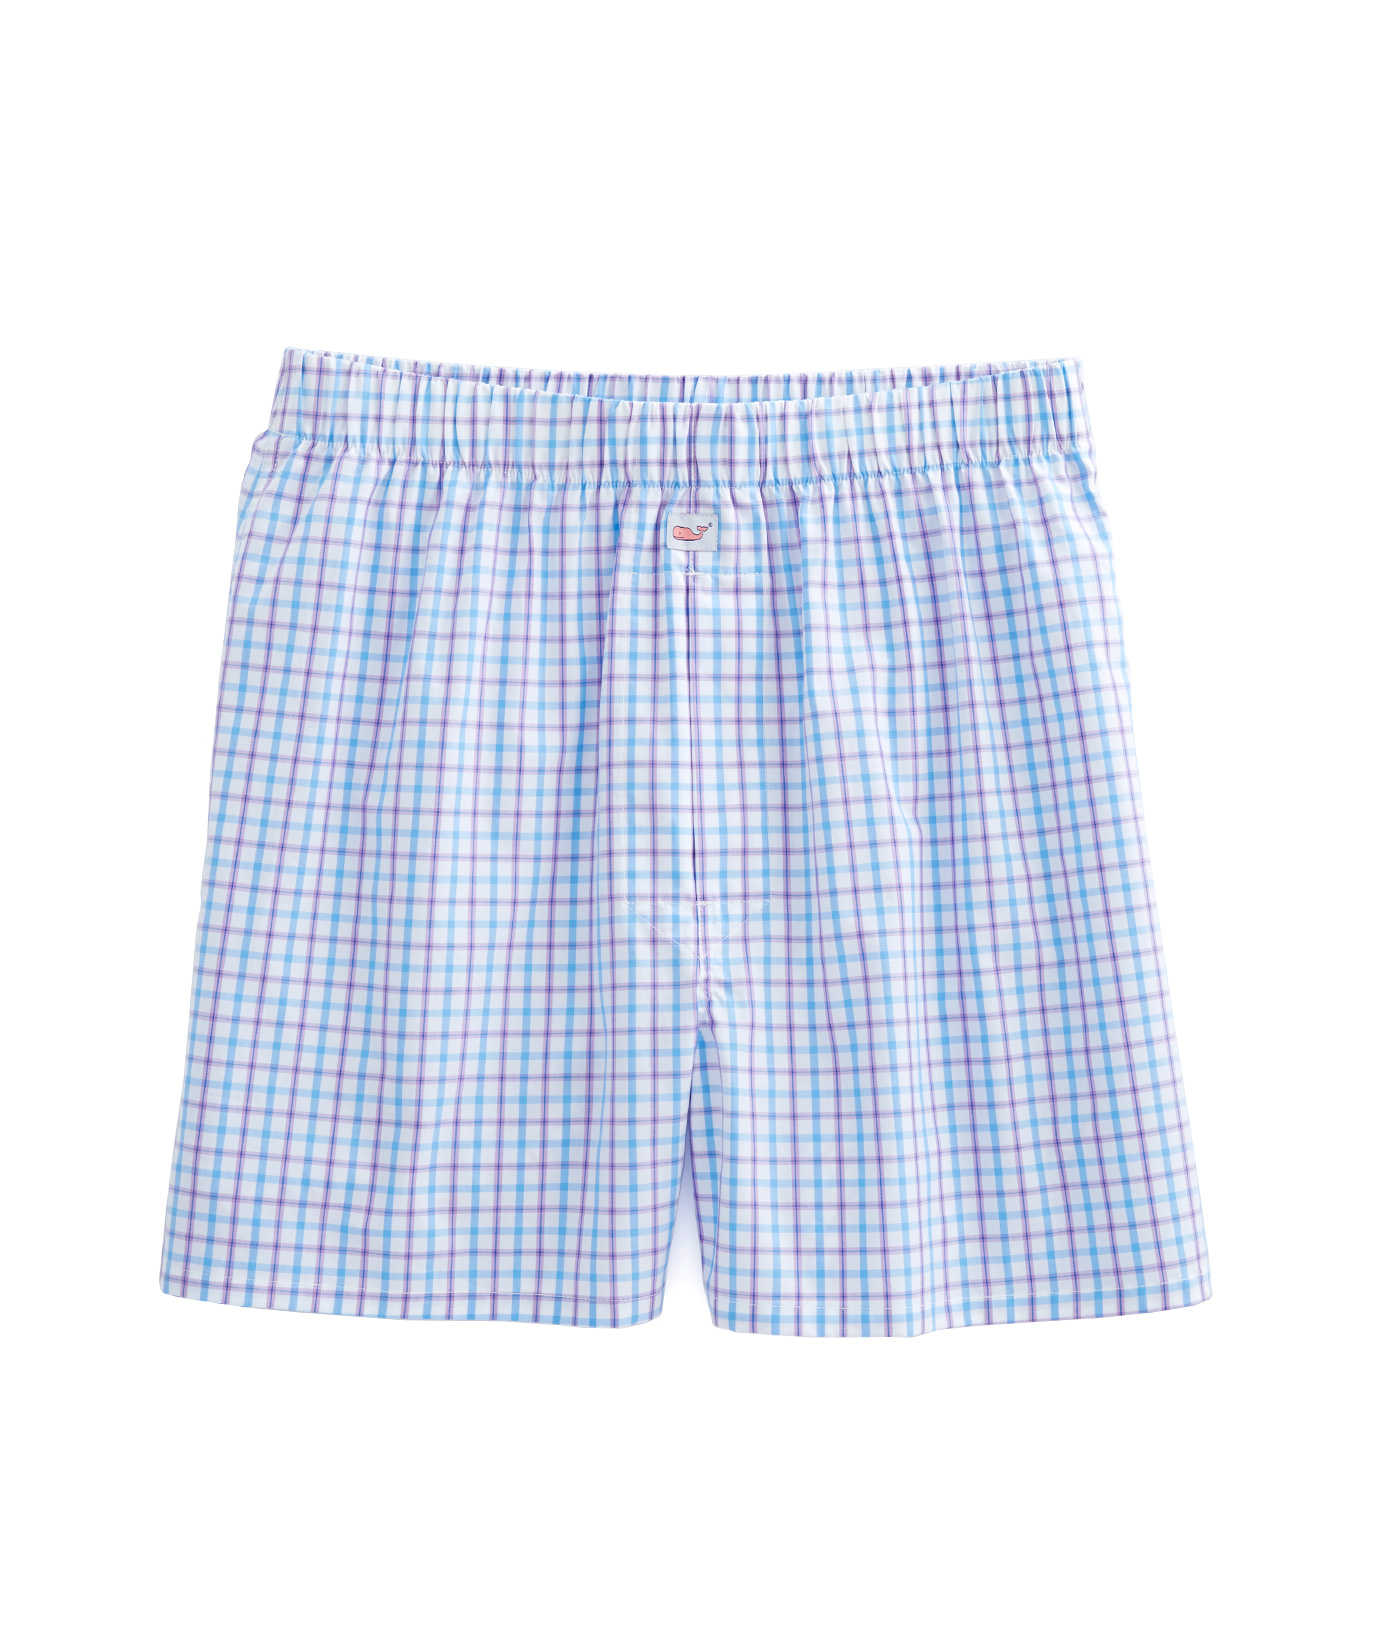 Shop Cays Tattersall Dress Boxers at vineyard vines